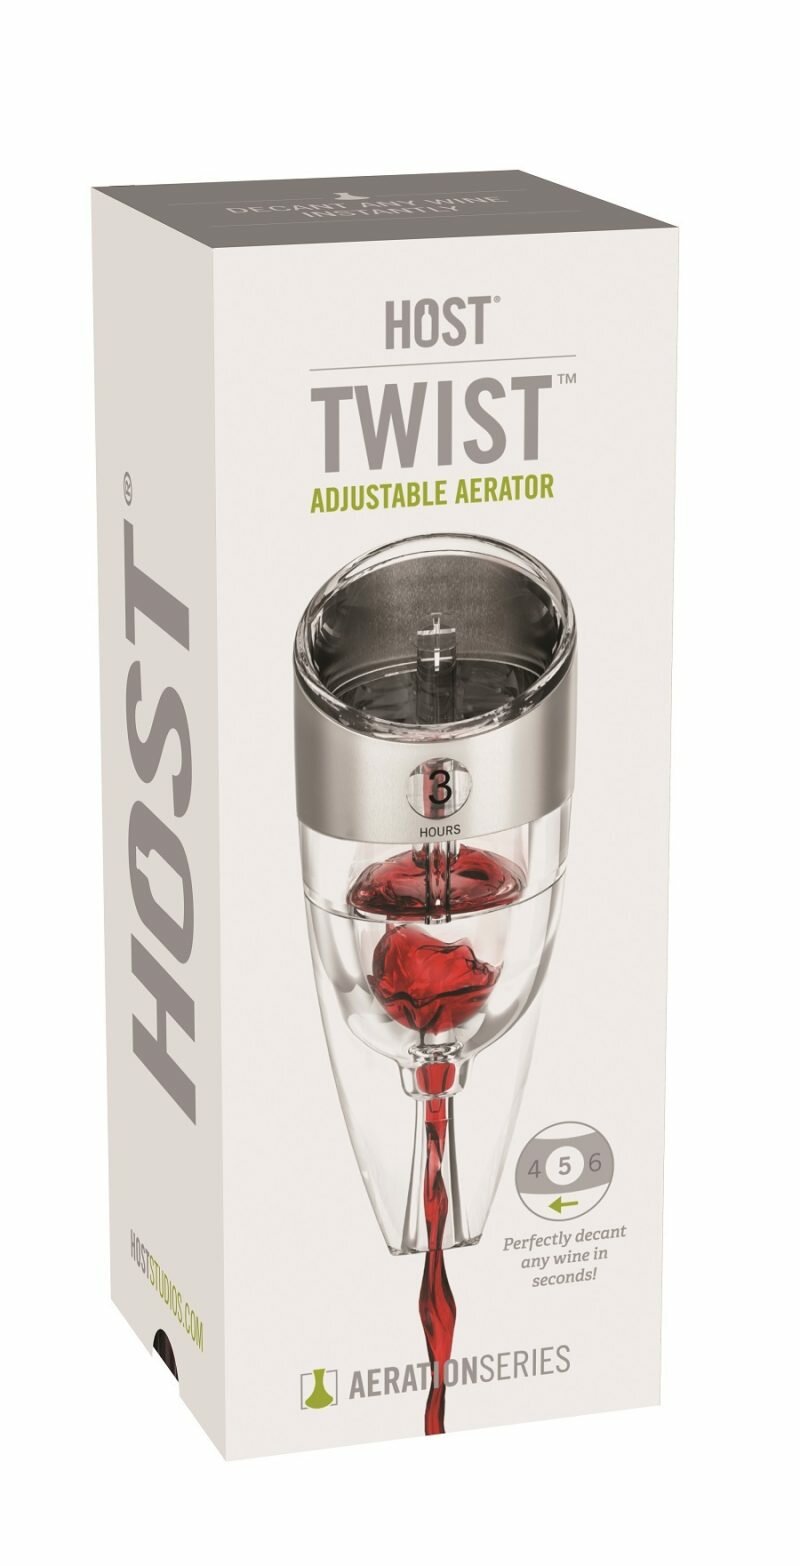 Stainless Steel Luxury Adjustable Wine Aerator in Packaging Against a White Background